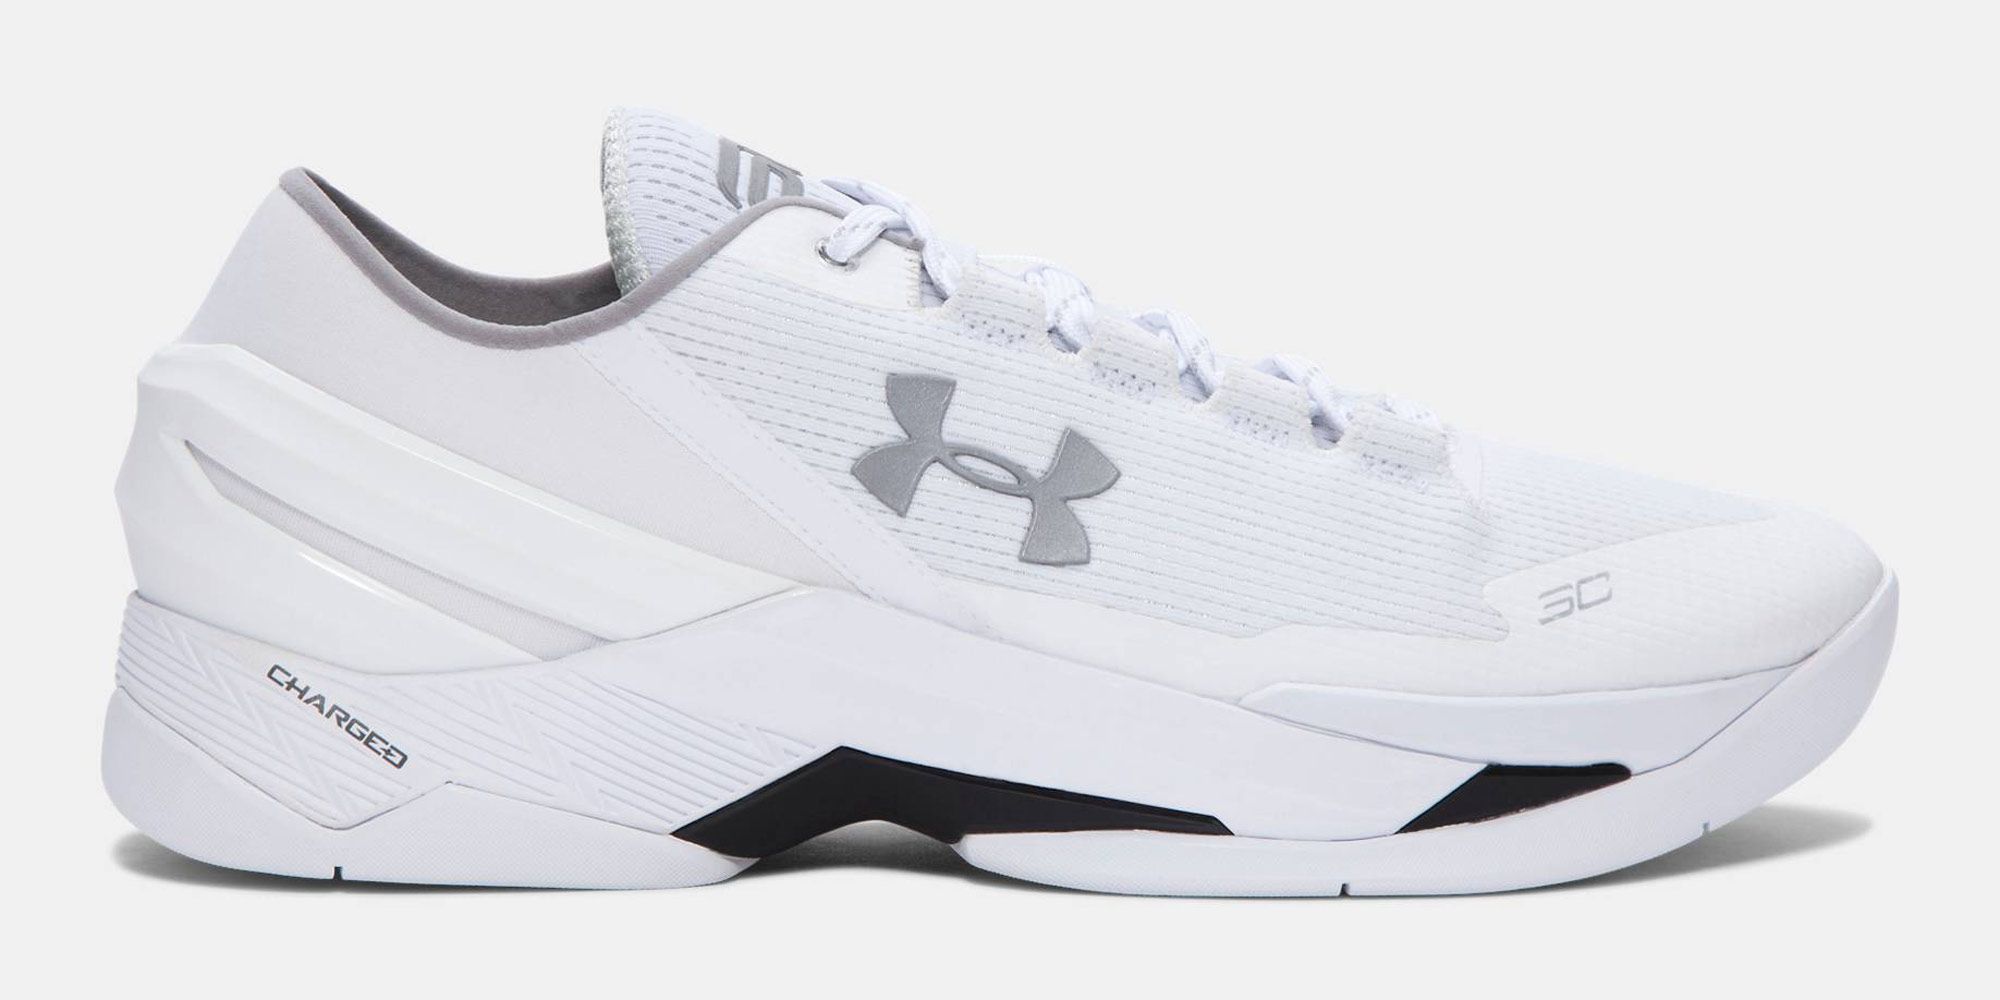 How Curry Brand Is Using Under Armour's Tech for Retro Sneakers